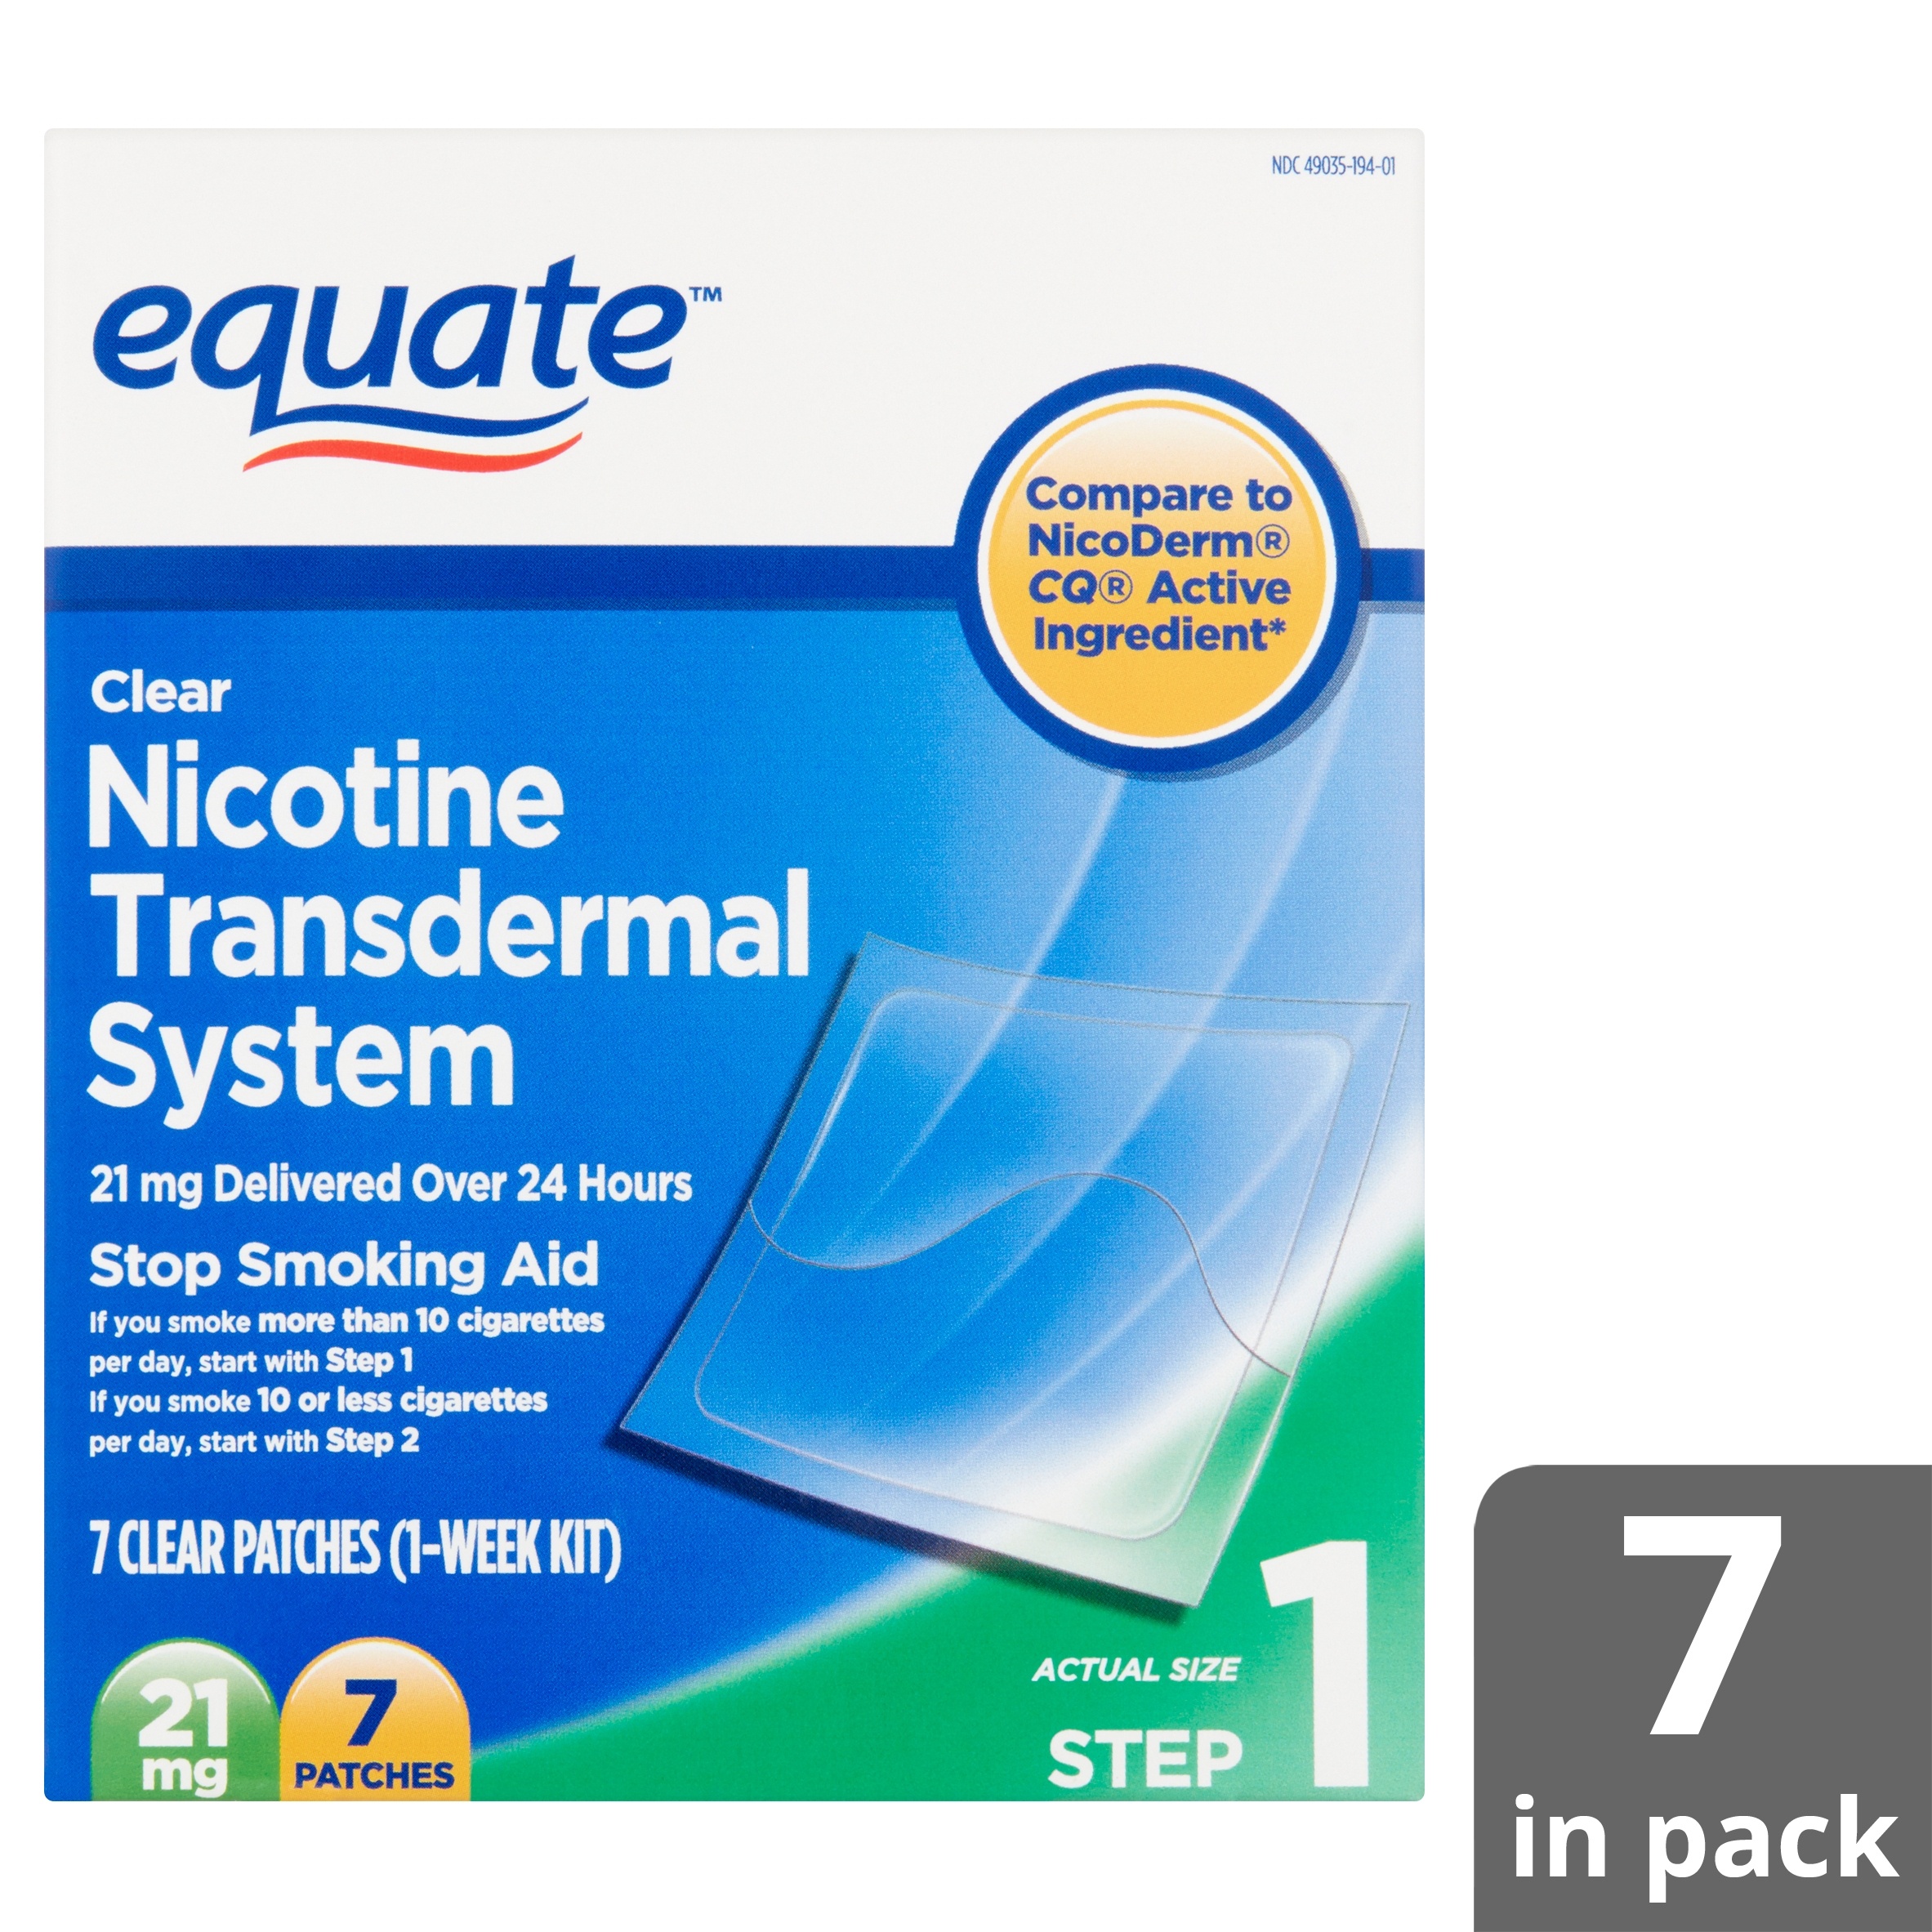 Equate Nicotine Transdermal System Clear Patches, 21 Mg, Step 1, 7 - Free Printable Nicotine Patch Coupons